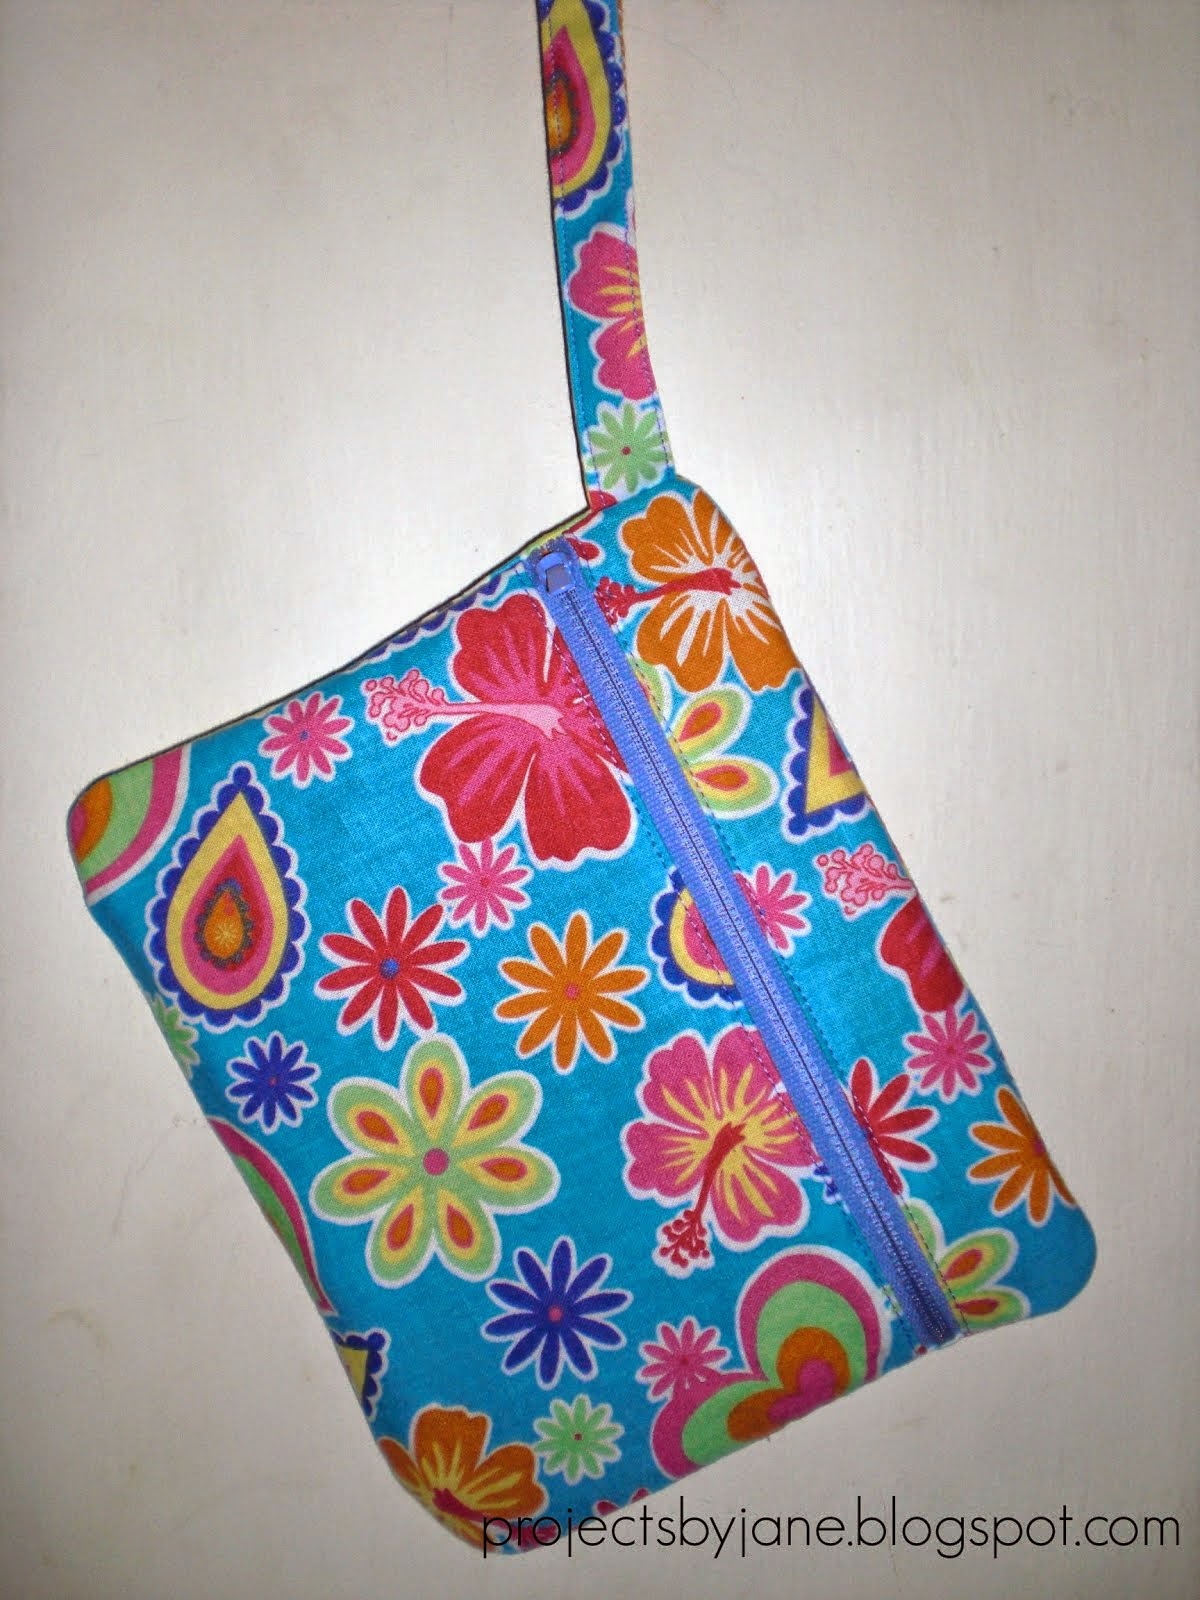 This is how I draw and sew a bag dart | Projects by Jane